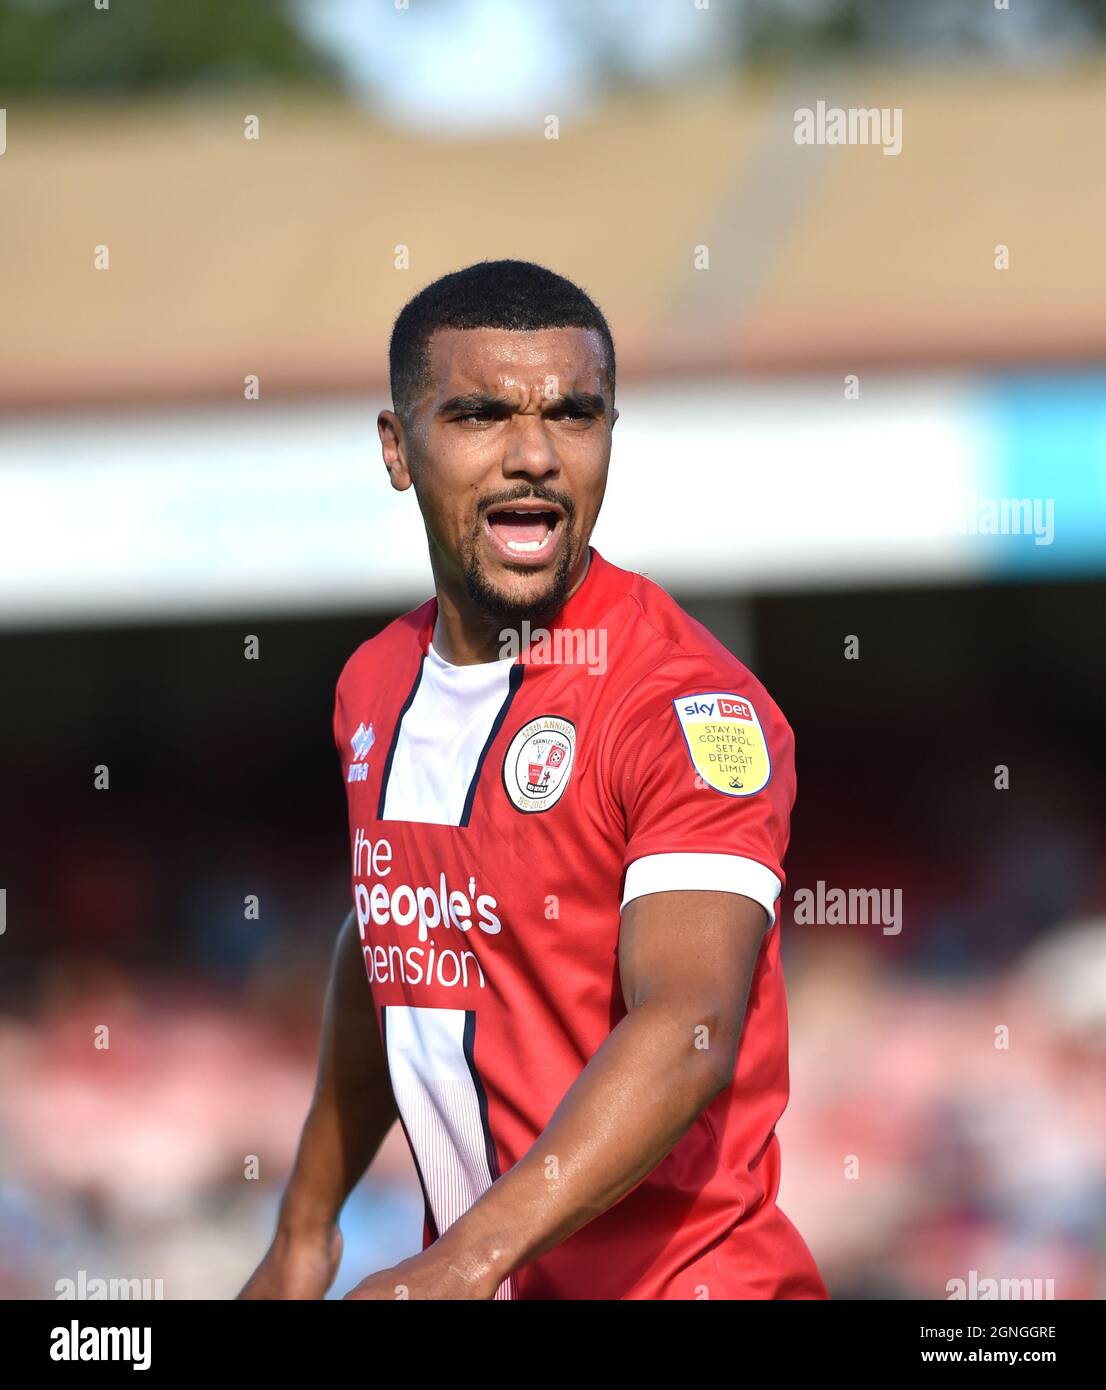 Kwesi Appiah of Crawley during the Sky Bet League Two match between Crawley Town and Bradford City at the People's Pension Stadium  , Crawley ,  UK - 25th September 2021 Editorial use only. No merchandising. For Football images FA and Premier League restrictions apply inc. no internet/mobile usage without FAPL license - for details contact Football Dataco Stock Photo